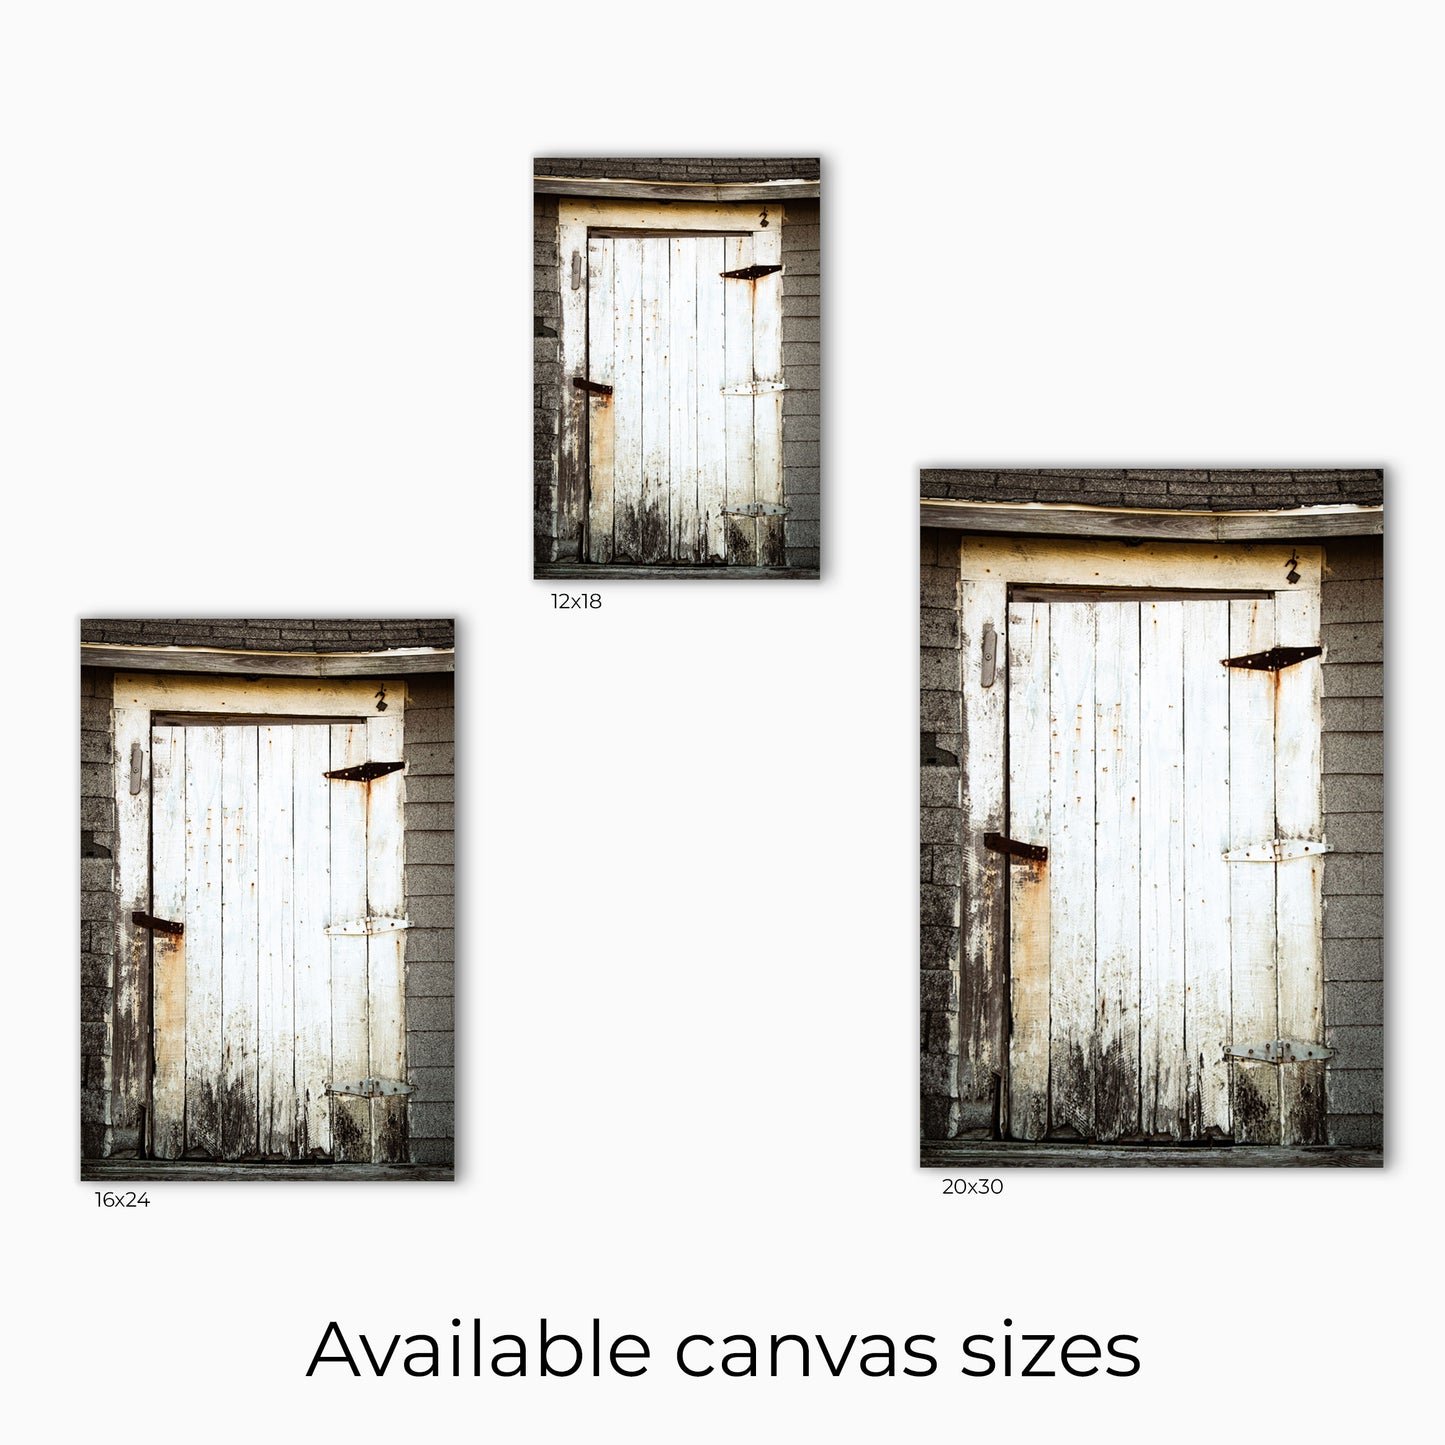 Visual representation of the canvas wall art print sizes available: 12x18, 16x24, and 20x30.